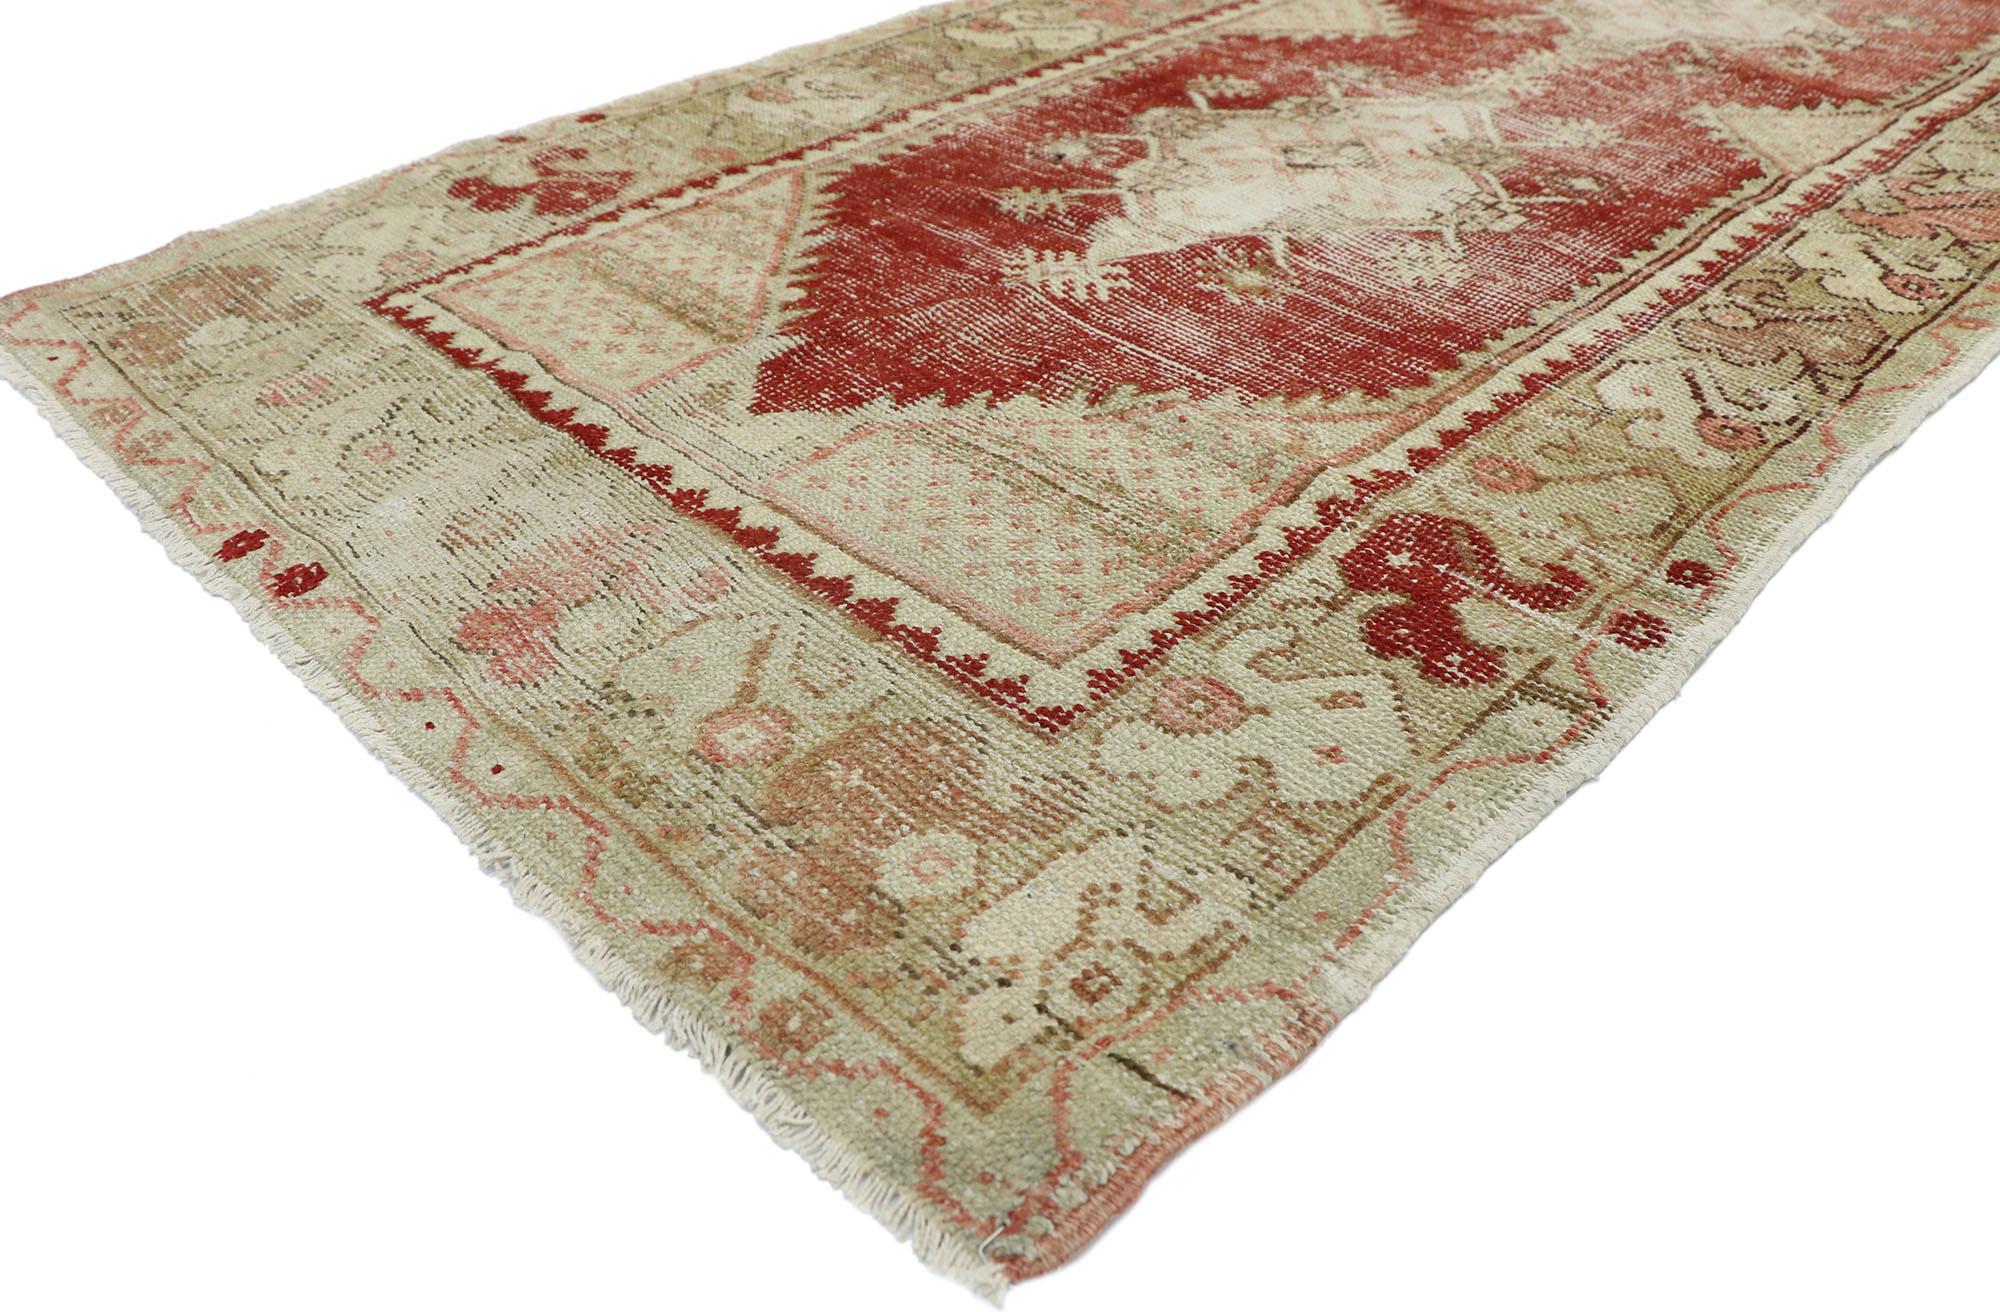 52719, distressed Vintage Turkish Oushak runner with Rustic neoclassical style. Romantic Rusticity meets timeless Anatolian tradition in this shabby chic neoclassical style hallway runner. This hand knotted wool distressed vintage Turkish Oushak